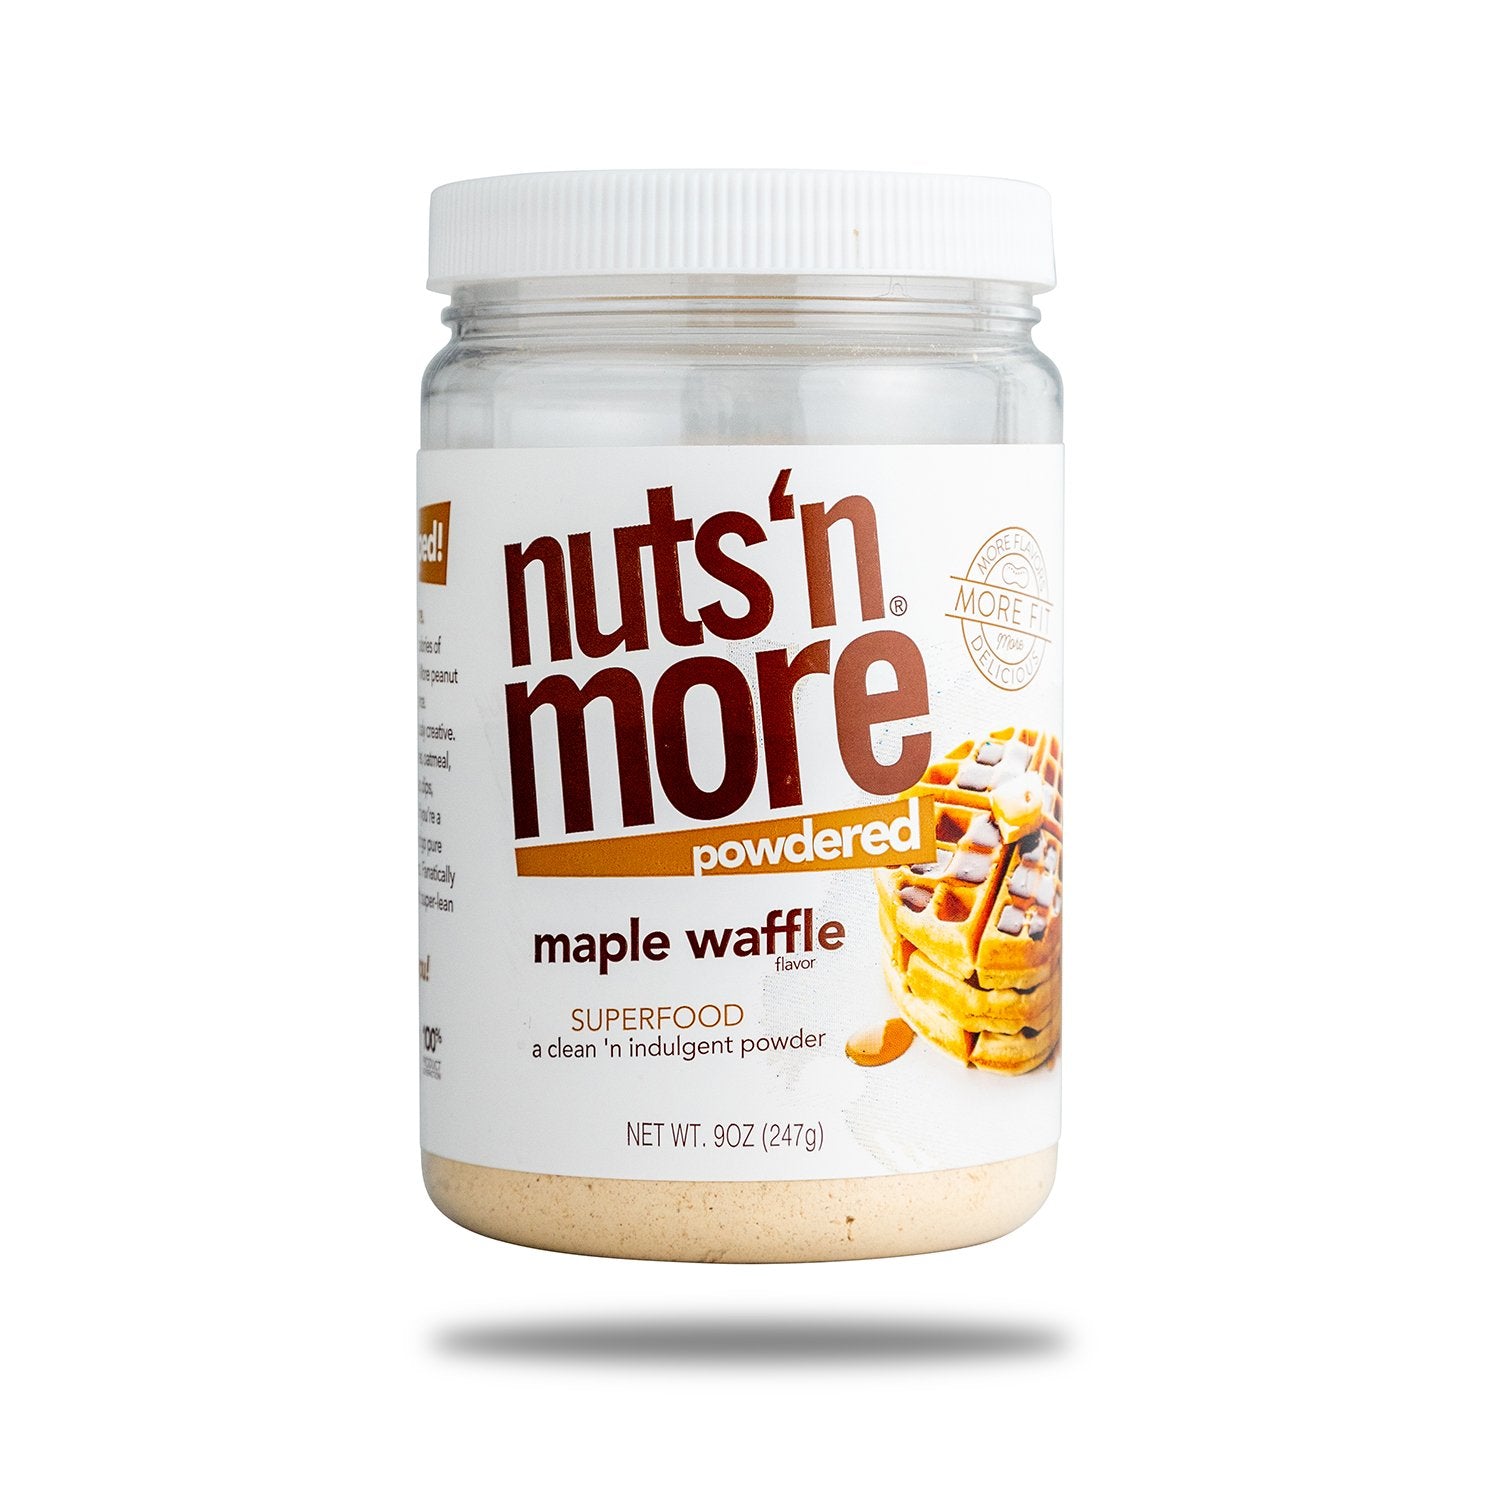 Nuts 'n More PB Powder Protein Snacks Maple Waffle BEST BY 10/14/22 Nuts 'n More